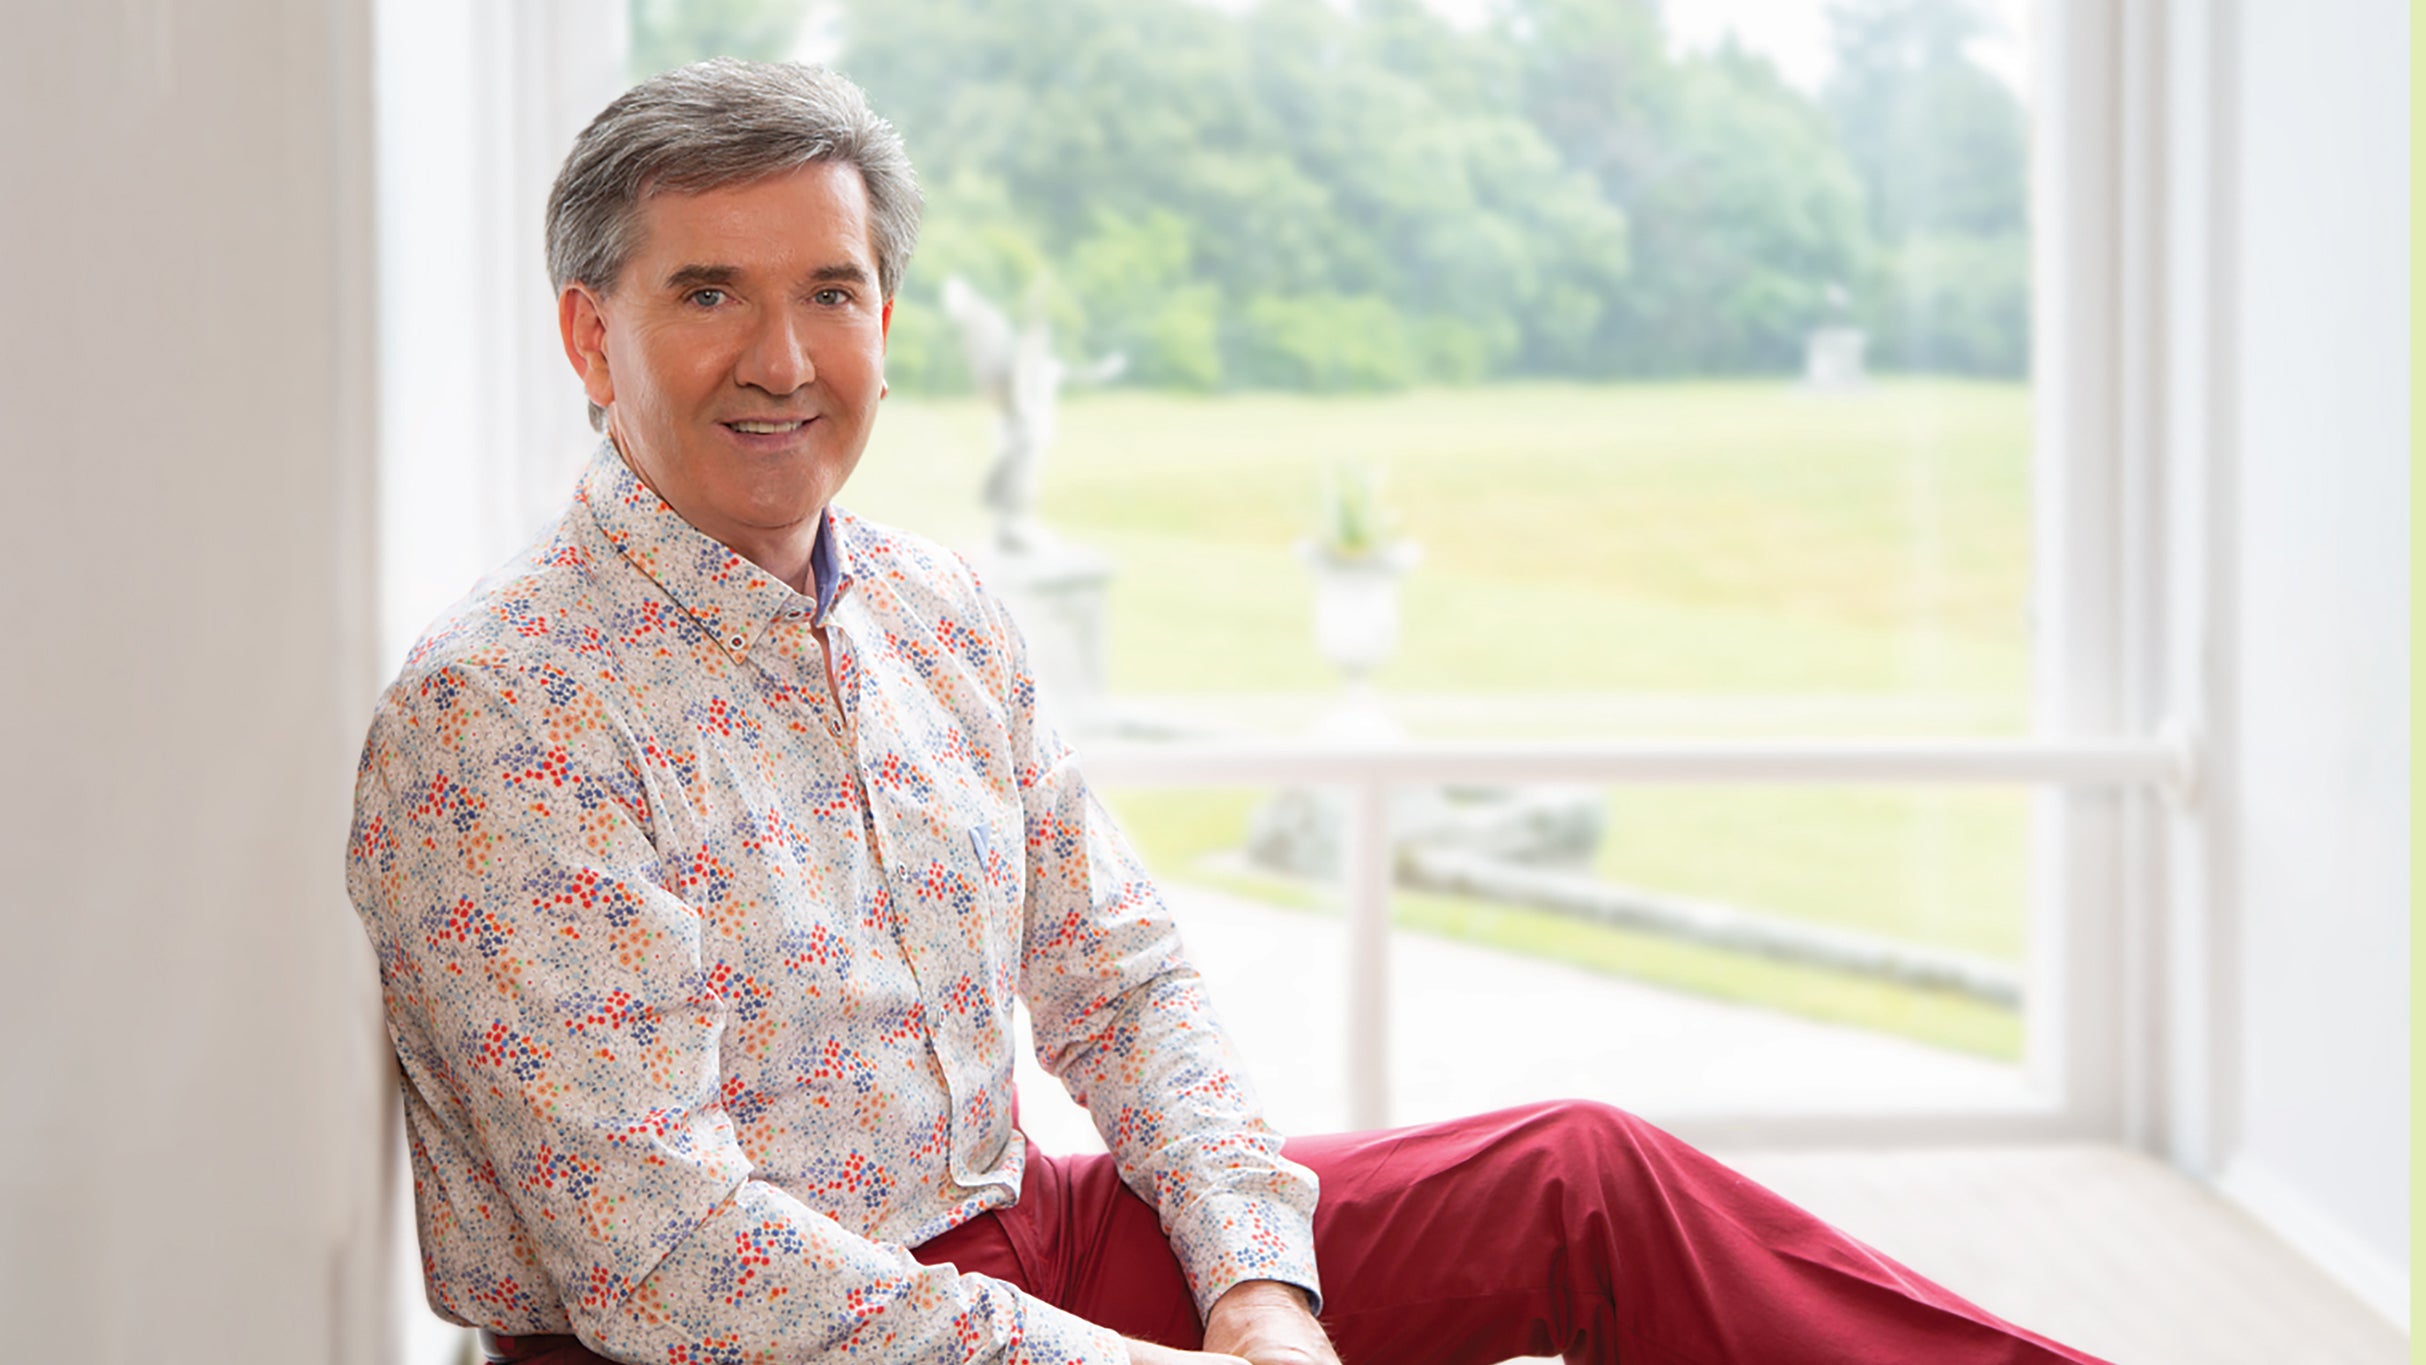 Daniel O'Donnell at Blue Gate Performing Arts Center